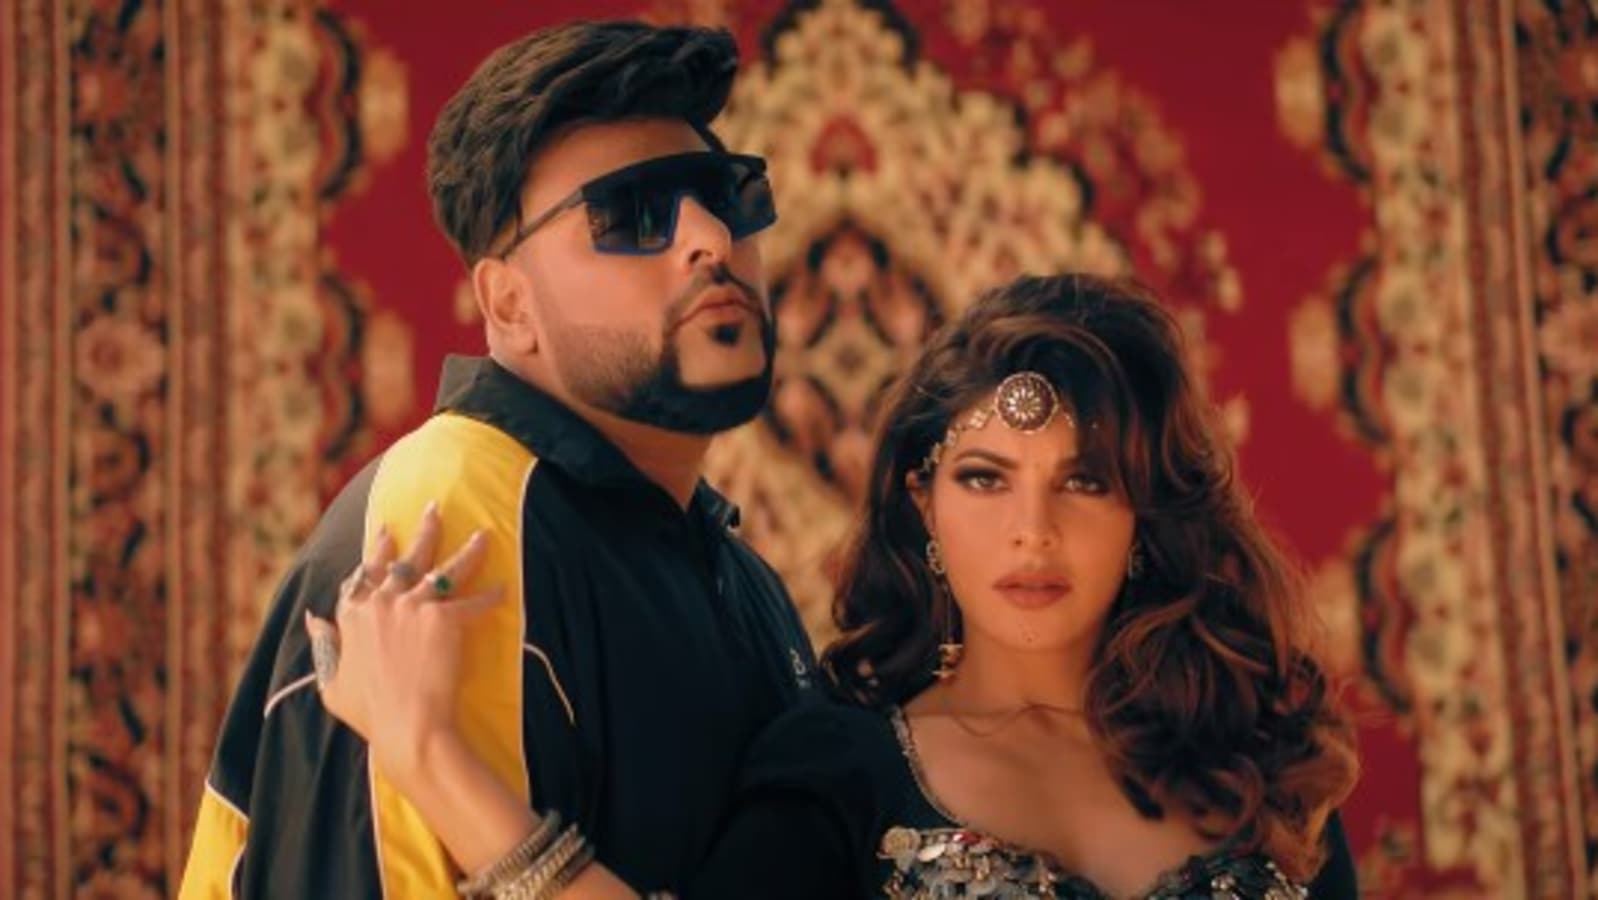 Jacqueline Fernandez reunites with Badshah for new song Paani Paani. Watch  video - Hindustan Times